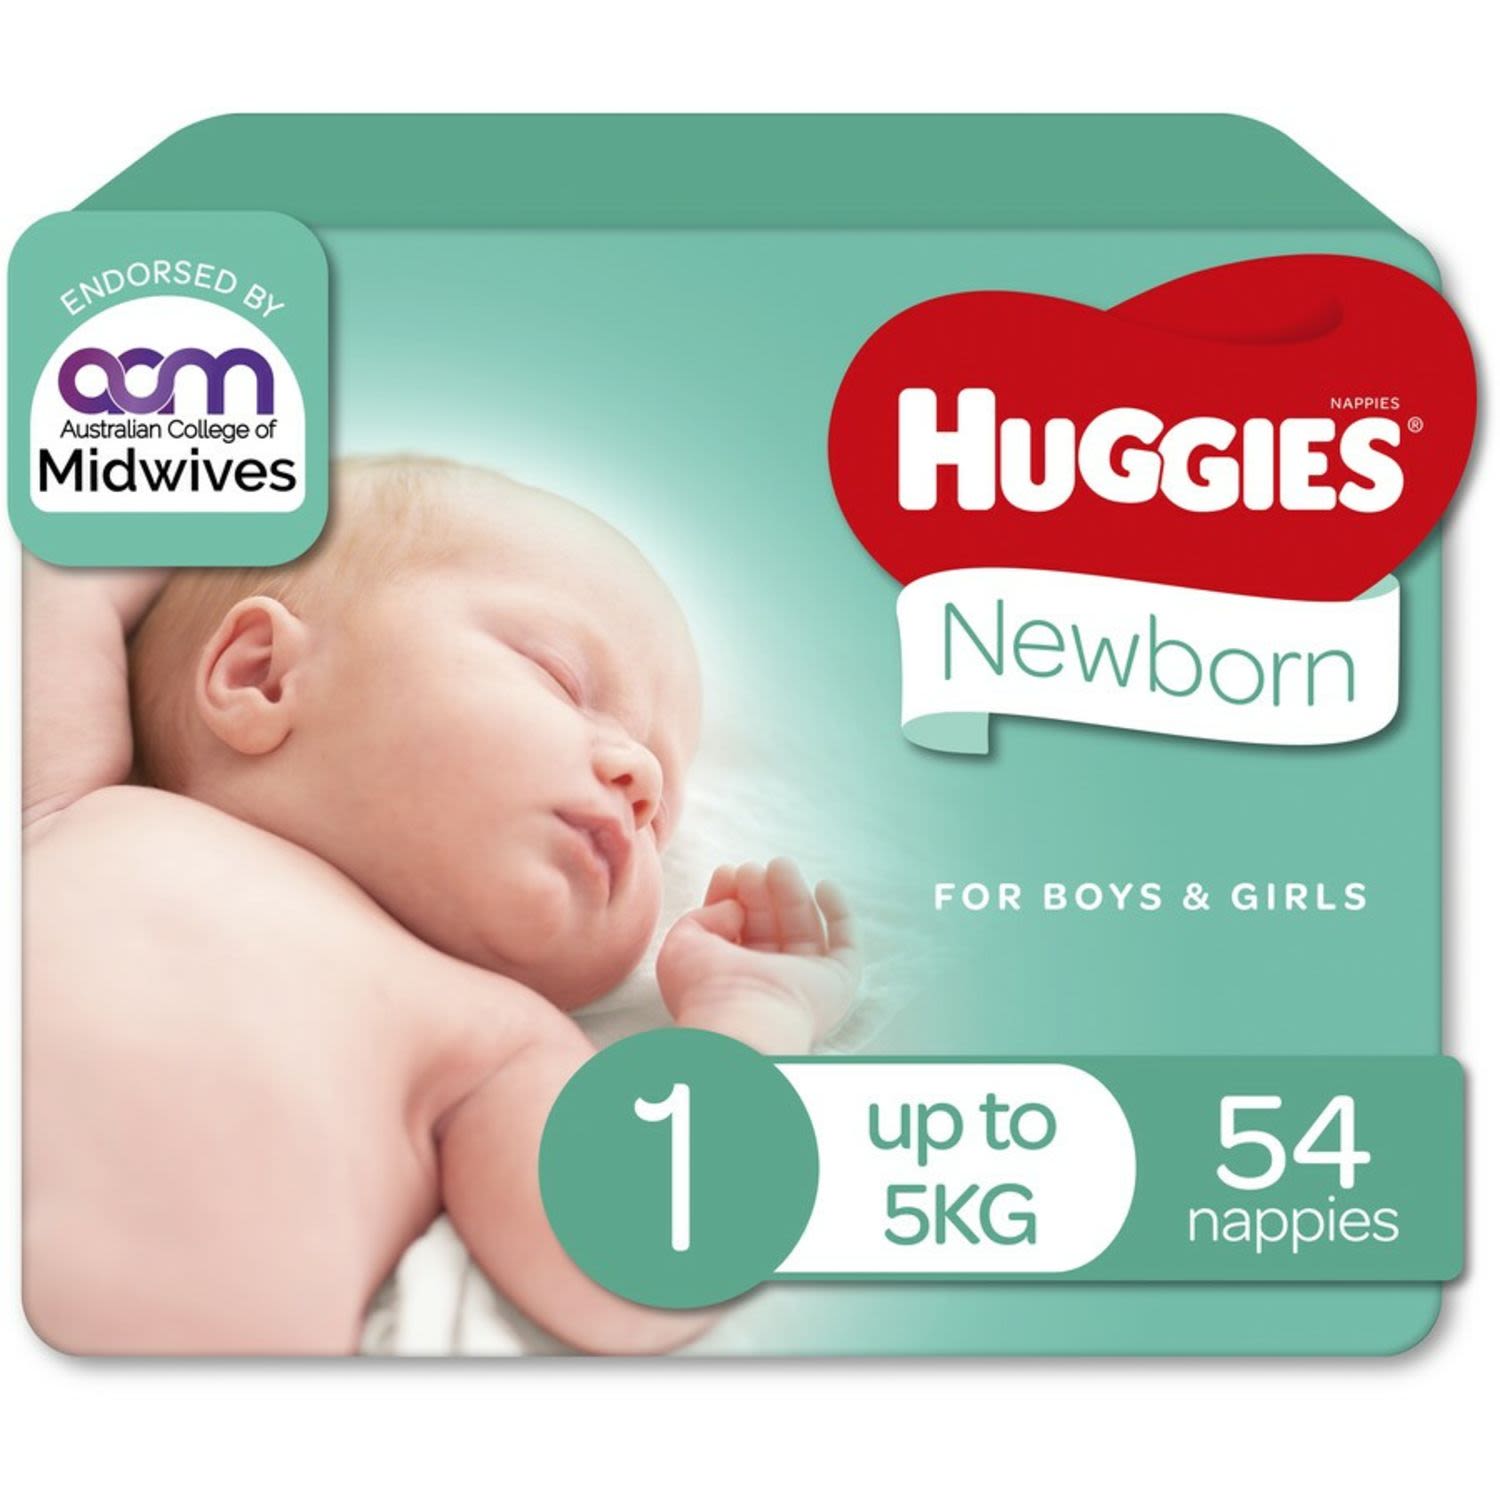 Huggies Newborn Nappies for Boys & Girls Size 1 (up to 5kg), 54 Each